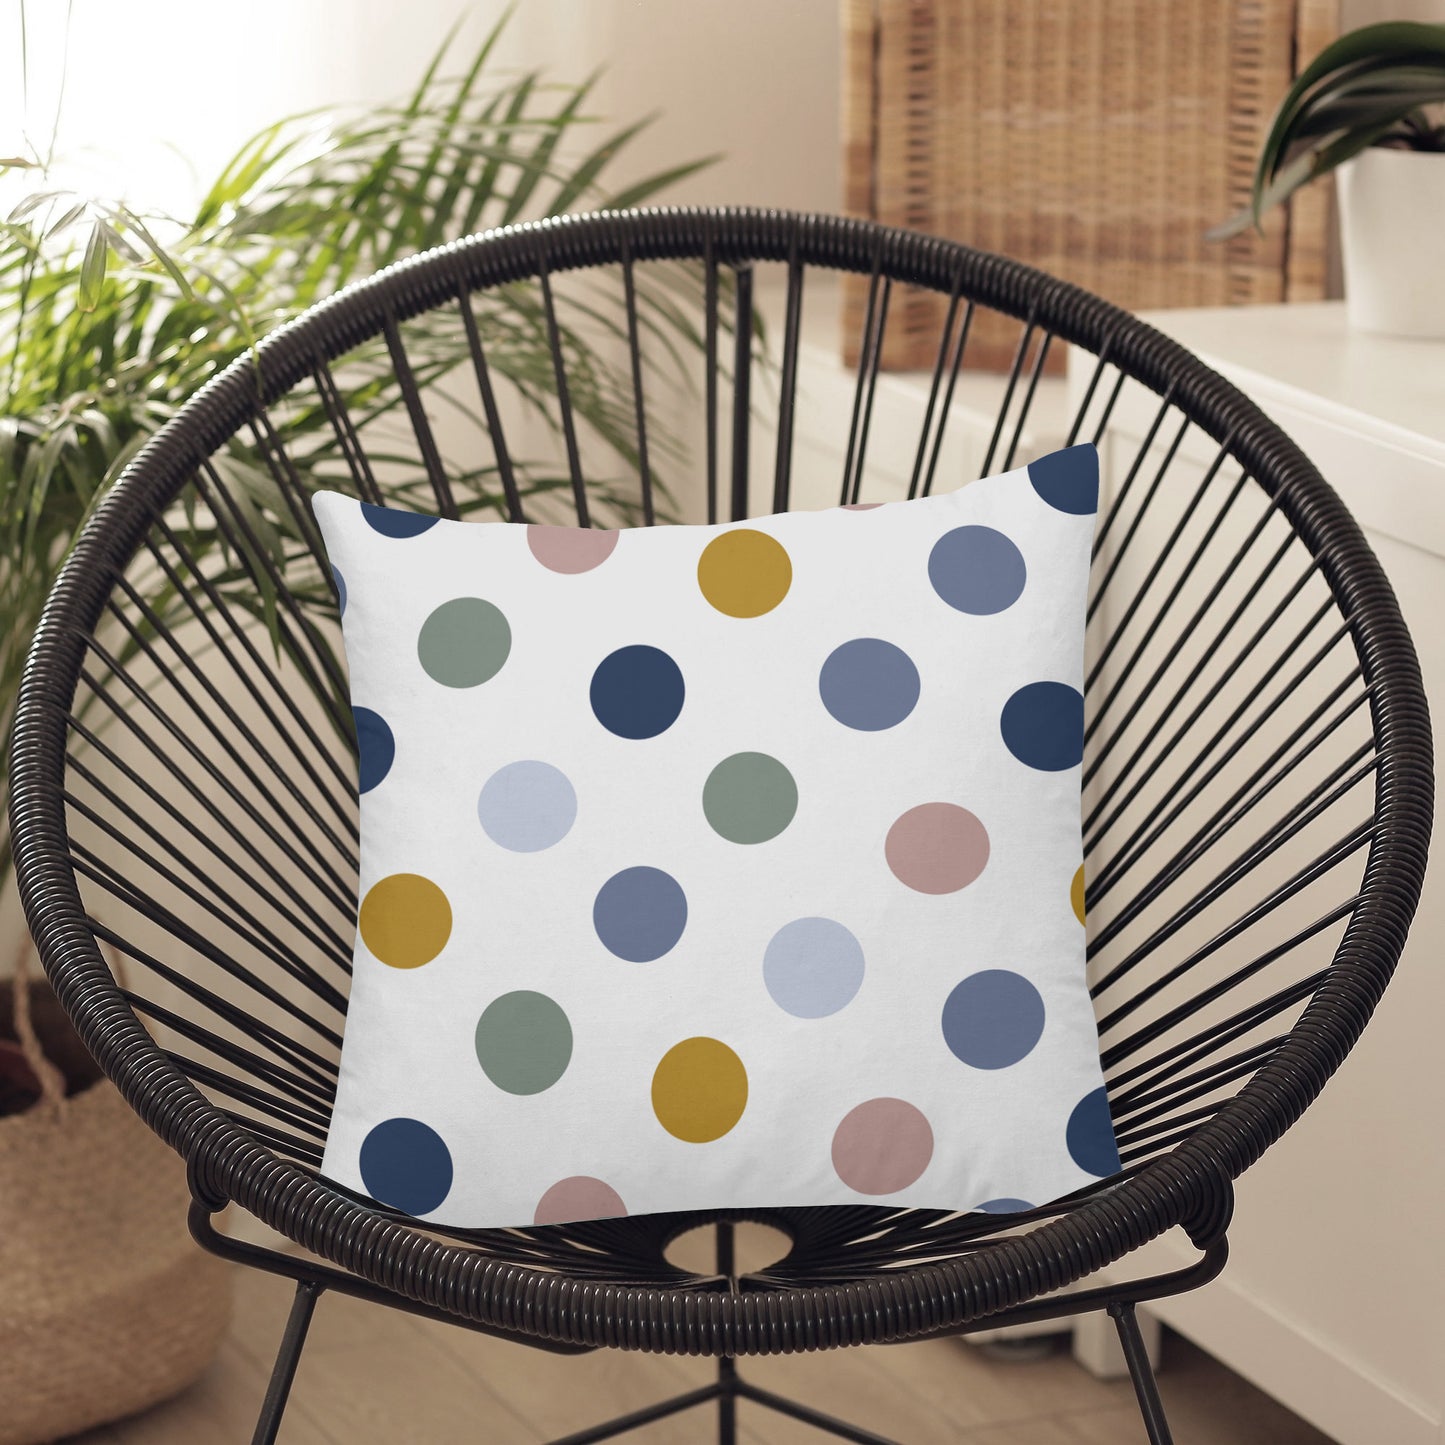 Indoor and outdoor stain-resistant cushion with stain-resistant filling 0120-160 50x50 cm